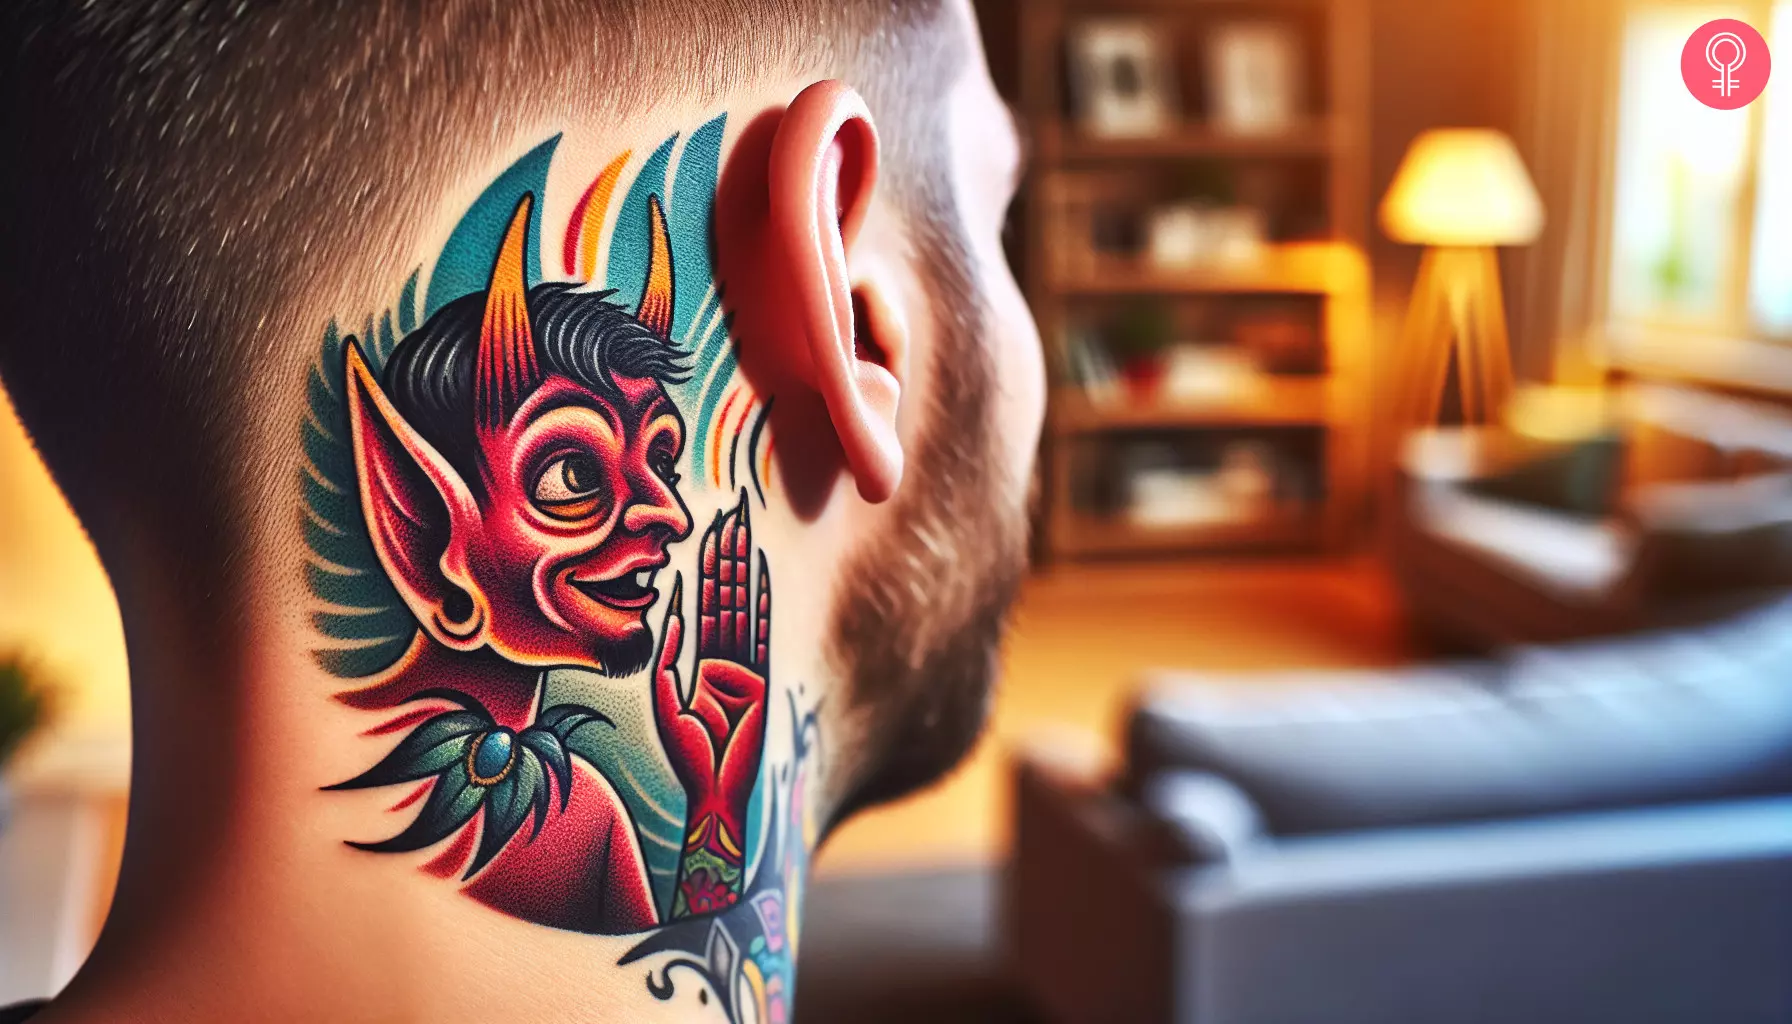 A devil whispering in ear tattoo on the neck